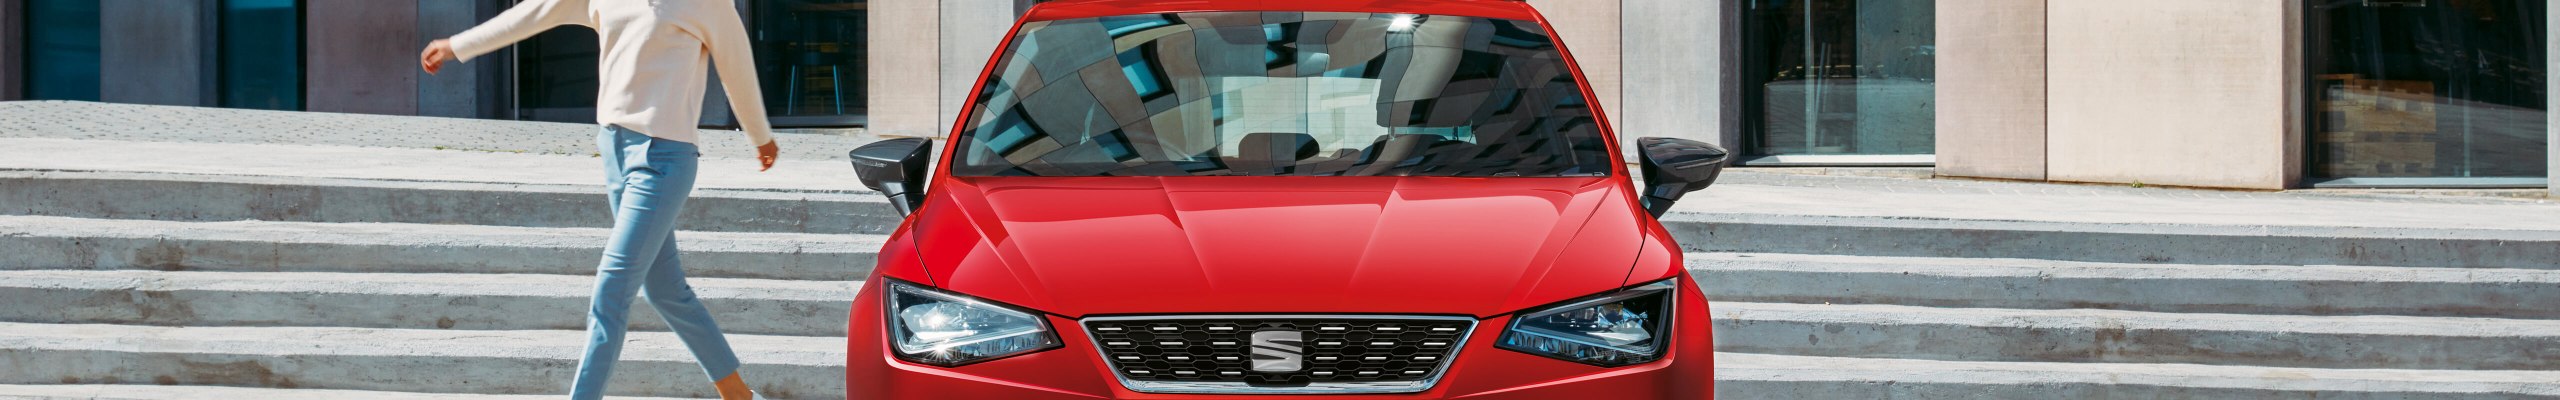 front view red SEAT Ibiza parked in the city